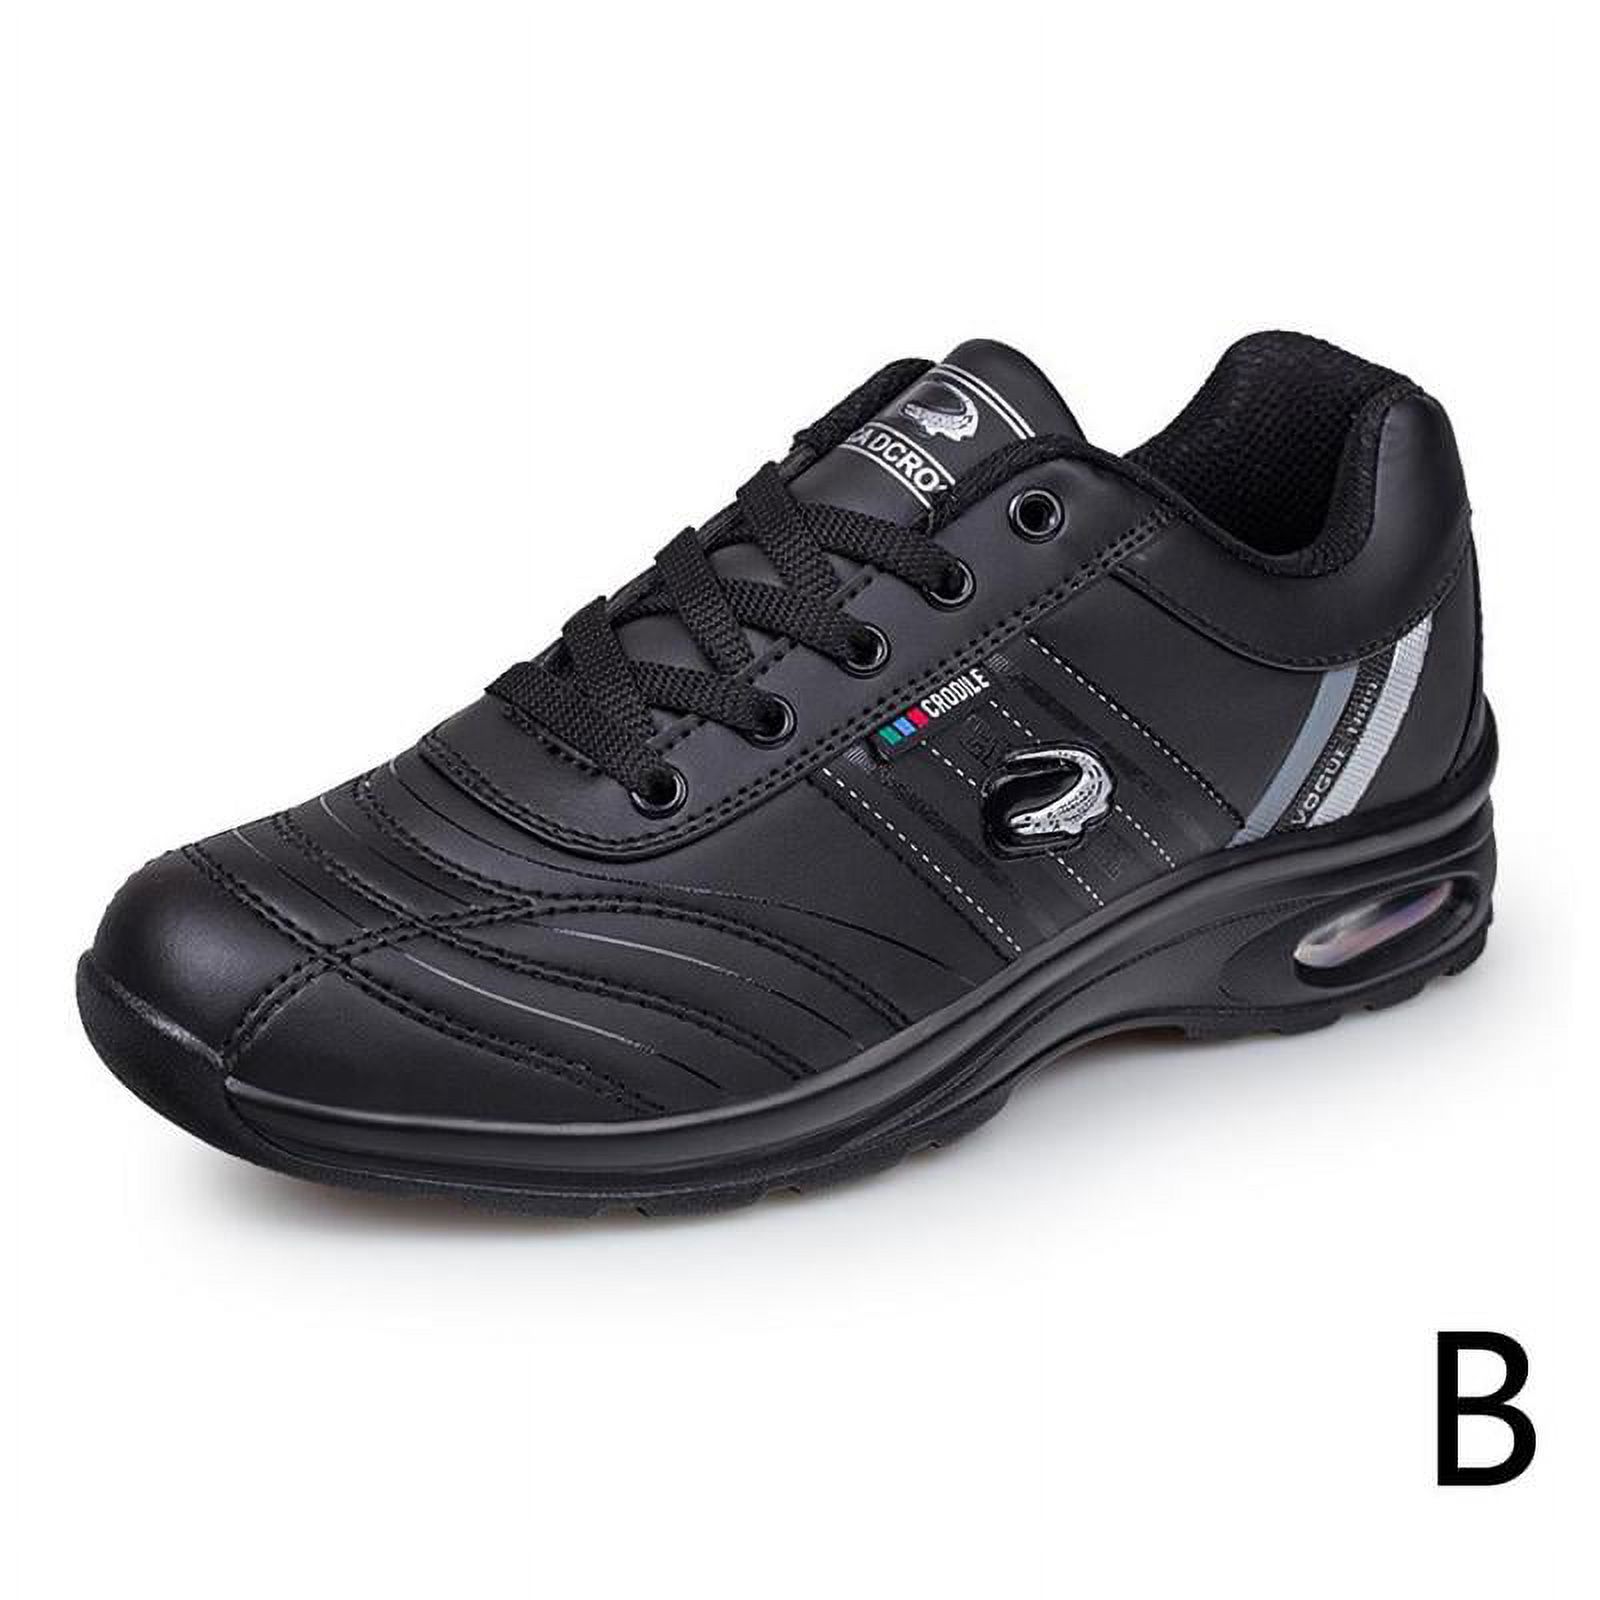 New Men's Golf Shoes Lightweight Men Shoes Golf Waterproof Anti-slip Shoes Golf Shoes Breathable Sports Shoes NEW - image 1 of 7